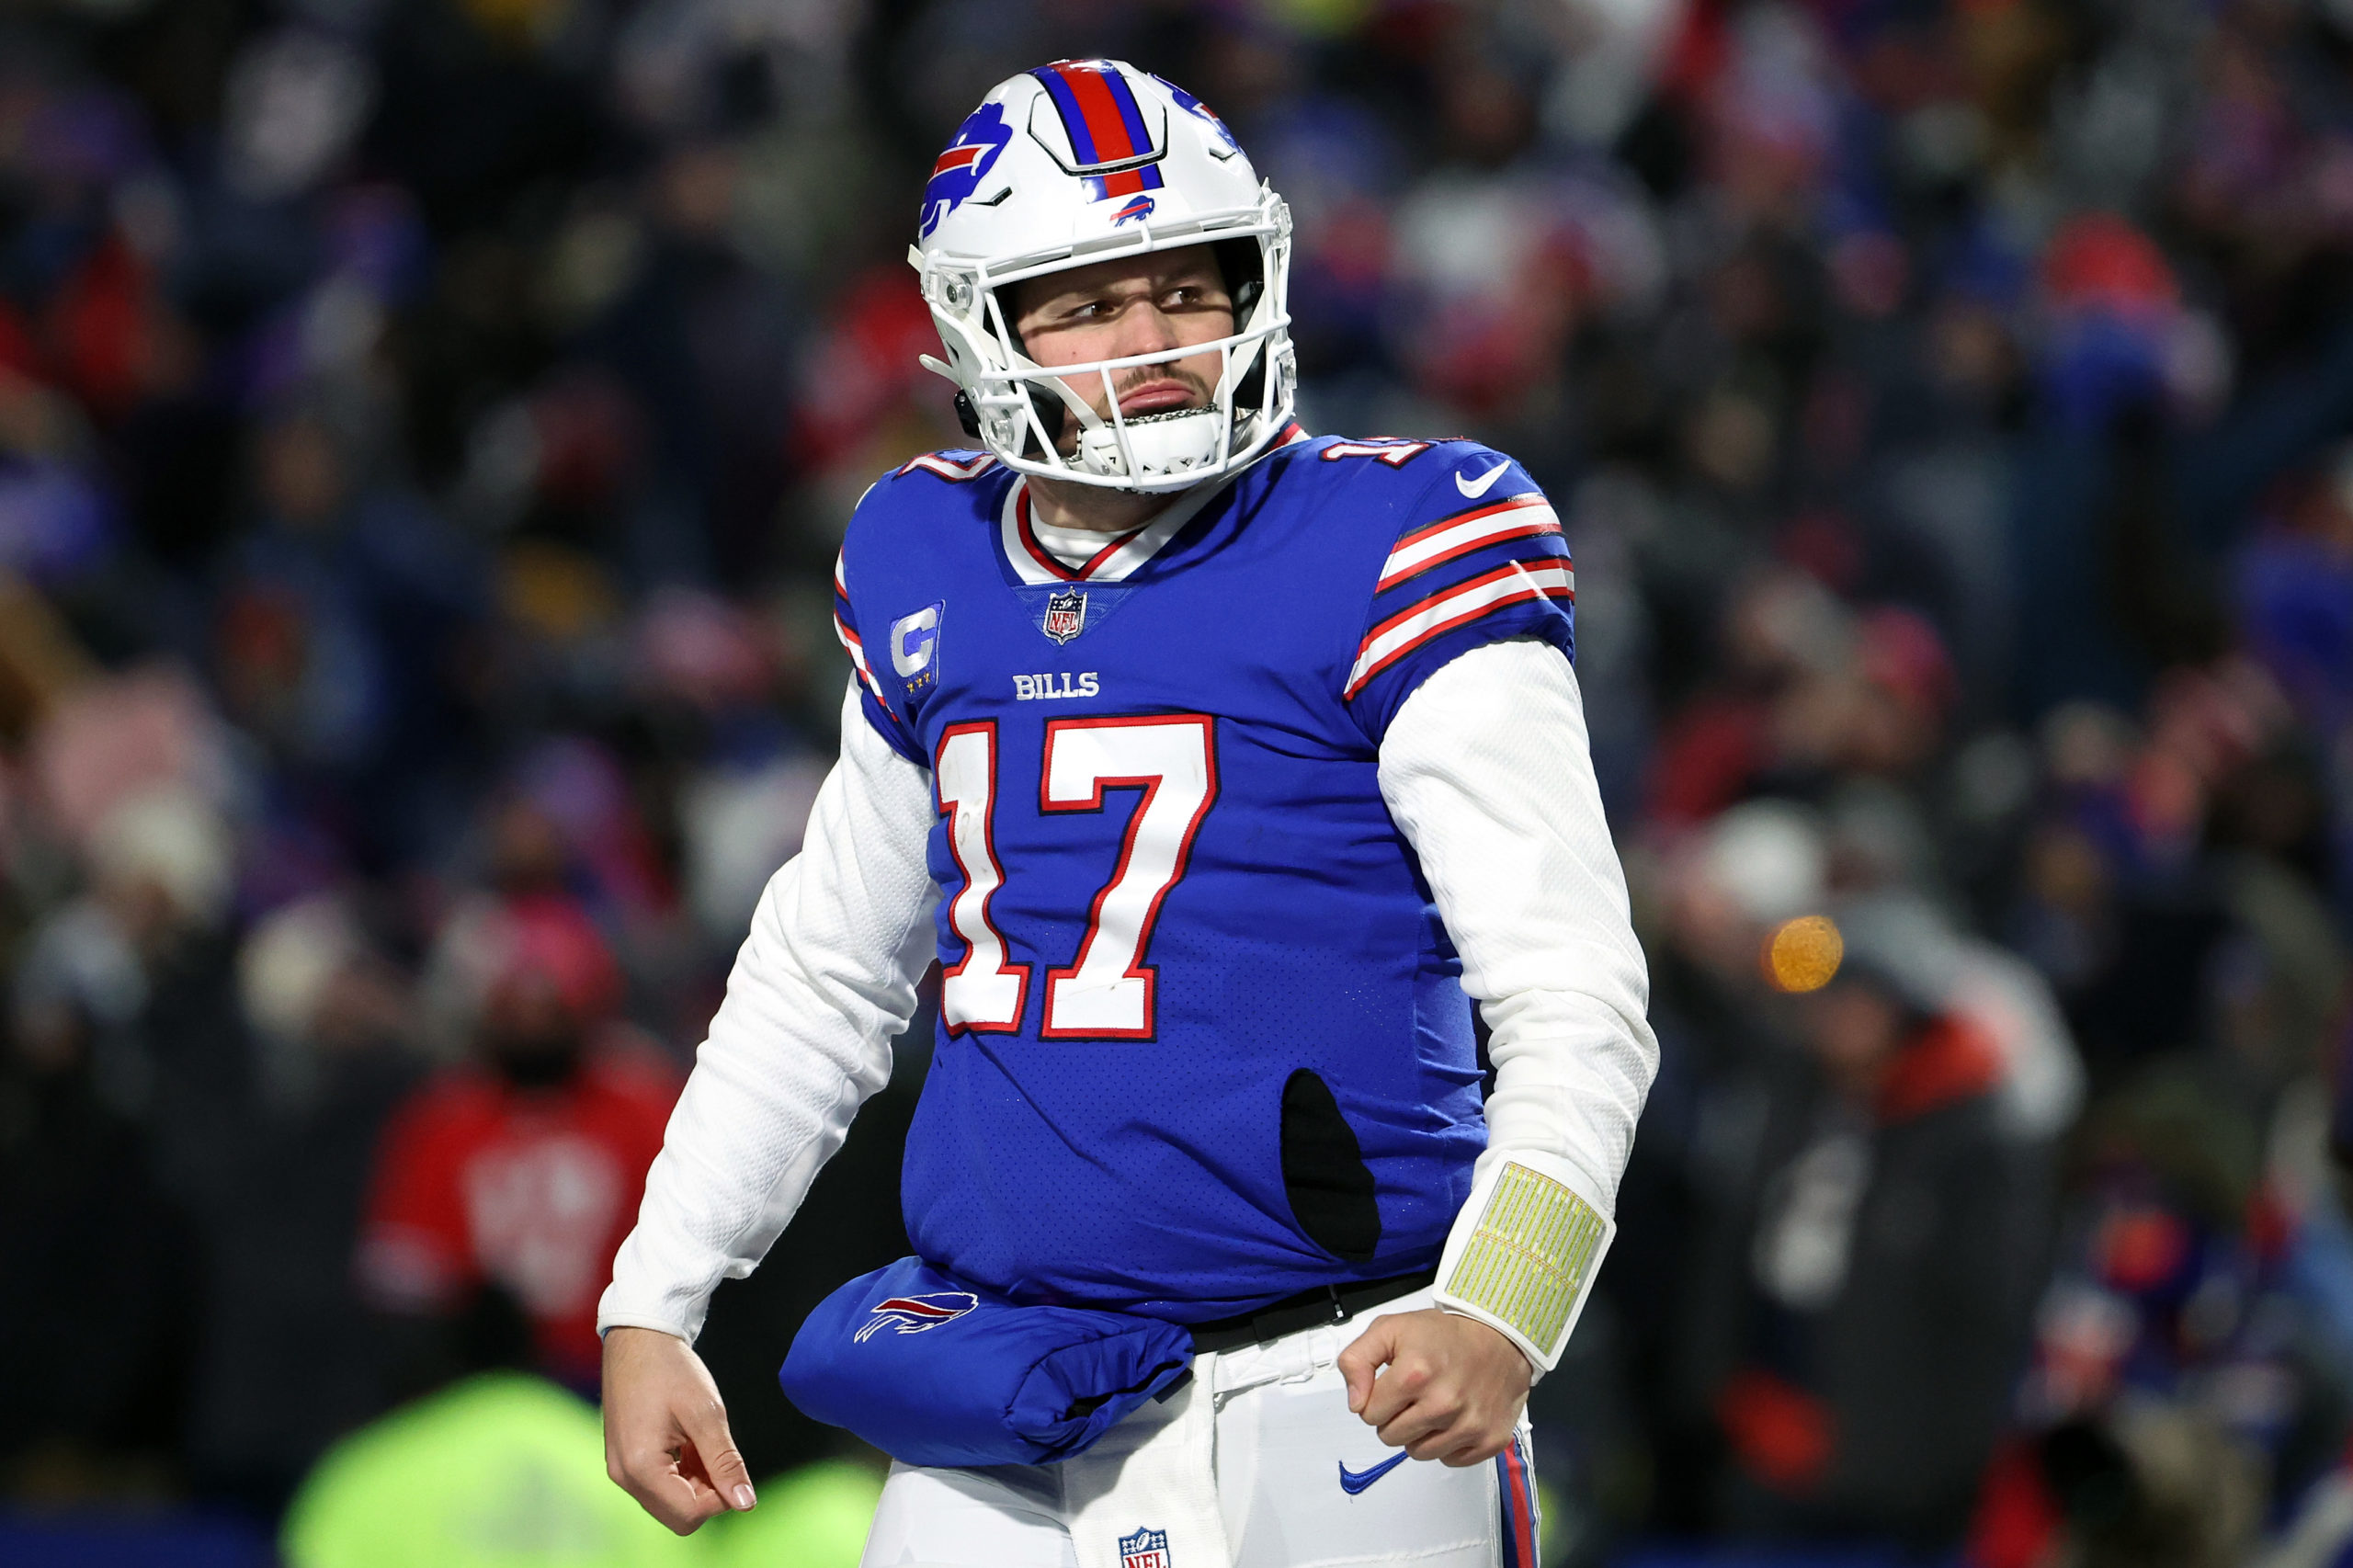 BUFFALO, NEW YORK - JANUARY 15: Josh Allen #17 of the Buffalo Bills celebrates after throwing a touchdown pass against the New England Patriots during the third quarter in the AFC Wild Card playoff game at Highmark Stadium on January 15, 2022 in Buffalo, New York. (Photo by Timothy T Ludwig/Getty Images)